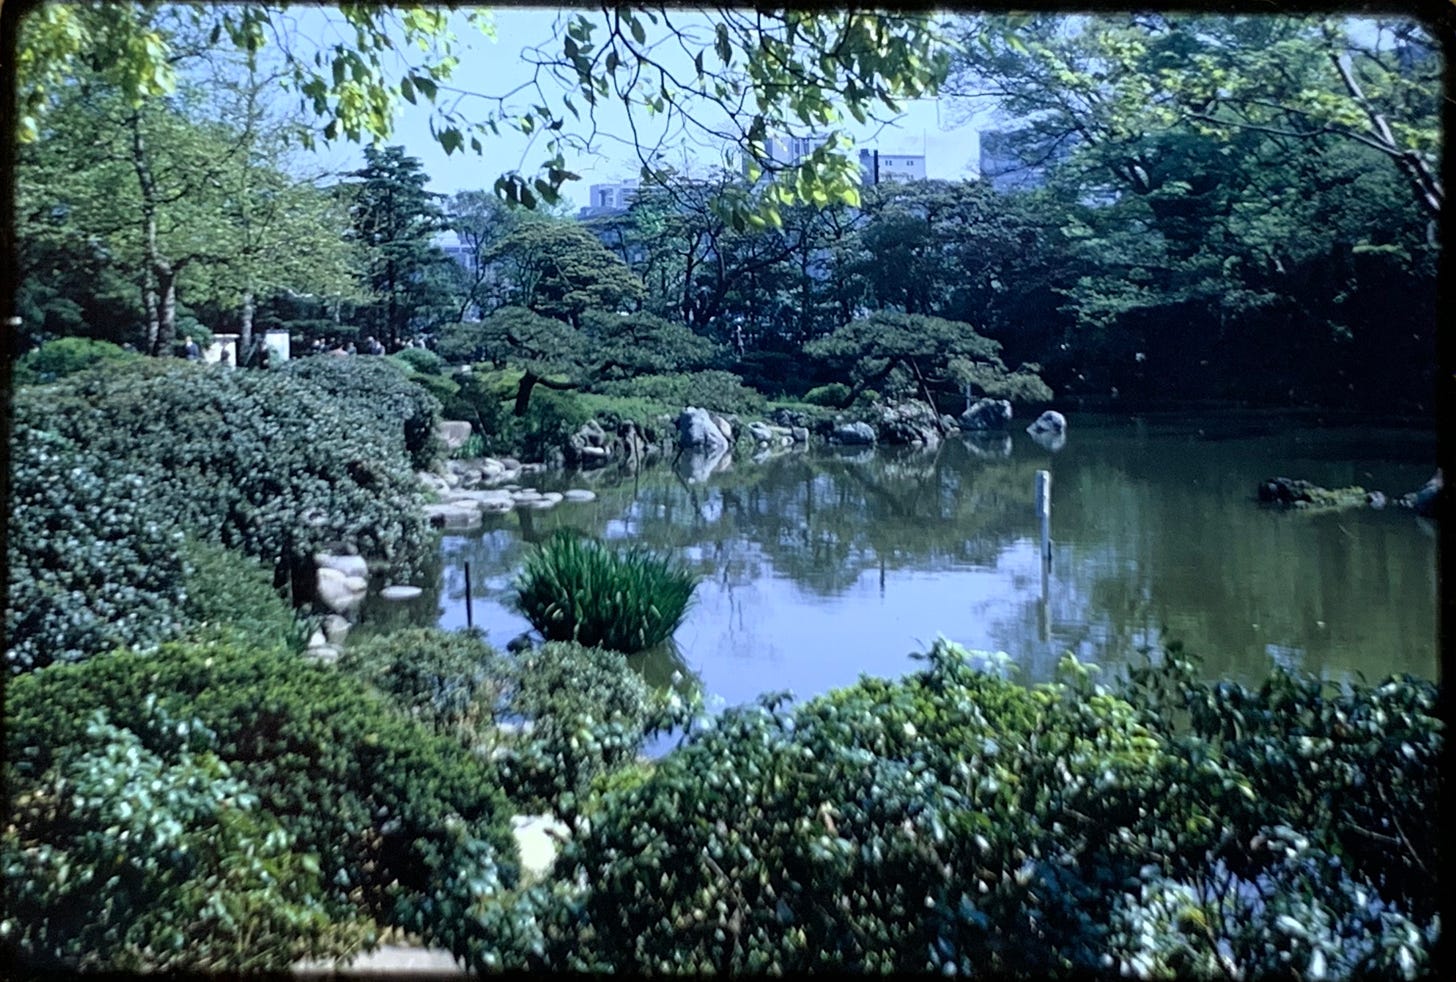 View of a lush green garden with a pond in the center.